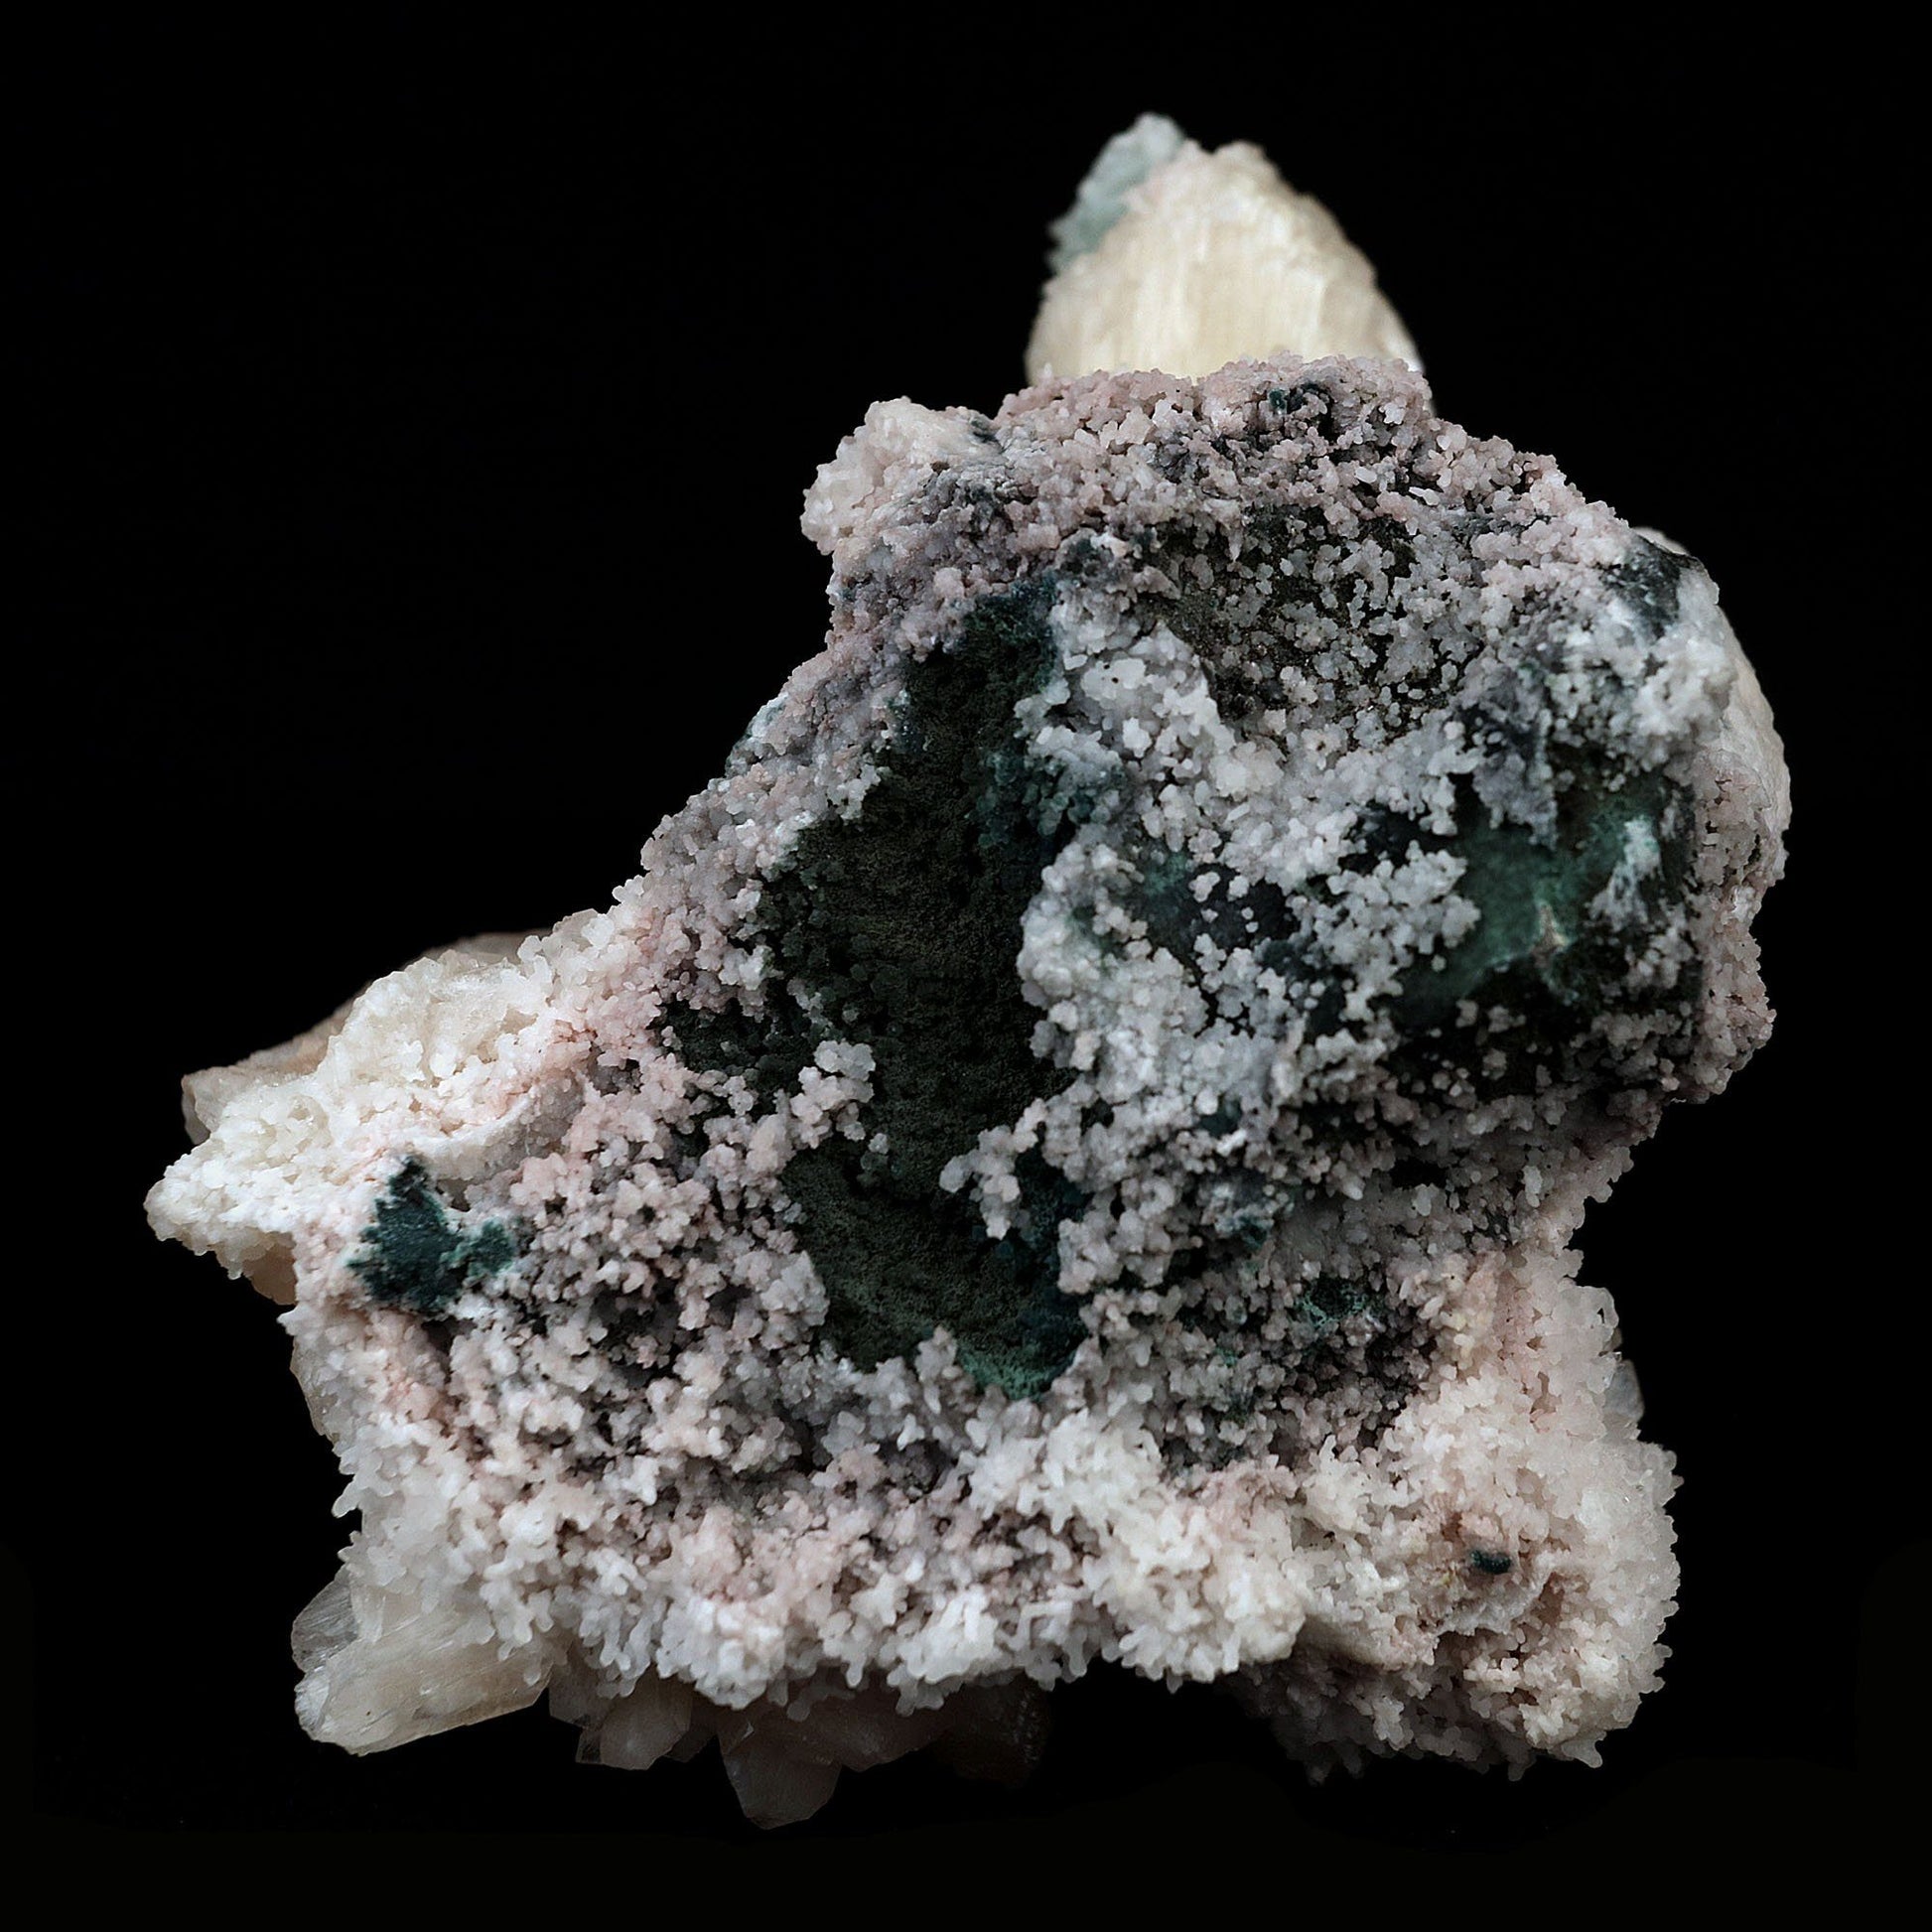 Green Apophyllite with Stilbite on Chalcedony Natural Mineral Specimen…  https://www.superbminerals.us/products/green-apophyllite-with-stilbite-on-chalcedony-natural-mineral-specimen-b-4116  Features:The specimen consists of striking, strongly lustrous, transparent and gem, rich green Apophyllite crystals growing in a beautiful spray. The quality of the Apophyllite is tremendous - transparent, limpid, perfect sharp pyramidal terminations and water clear. Small Stilbite crystals are seen too. In superb